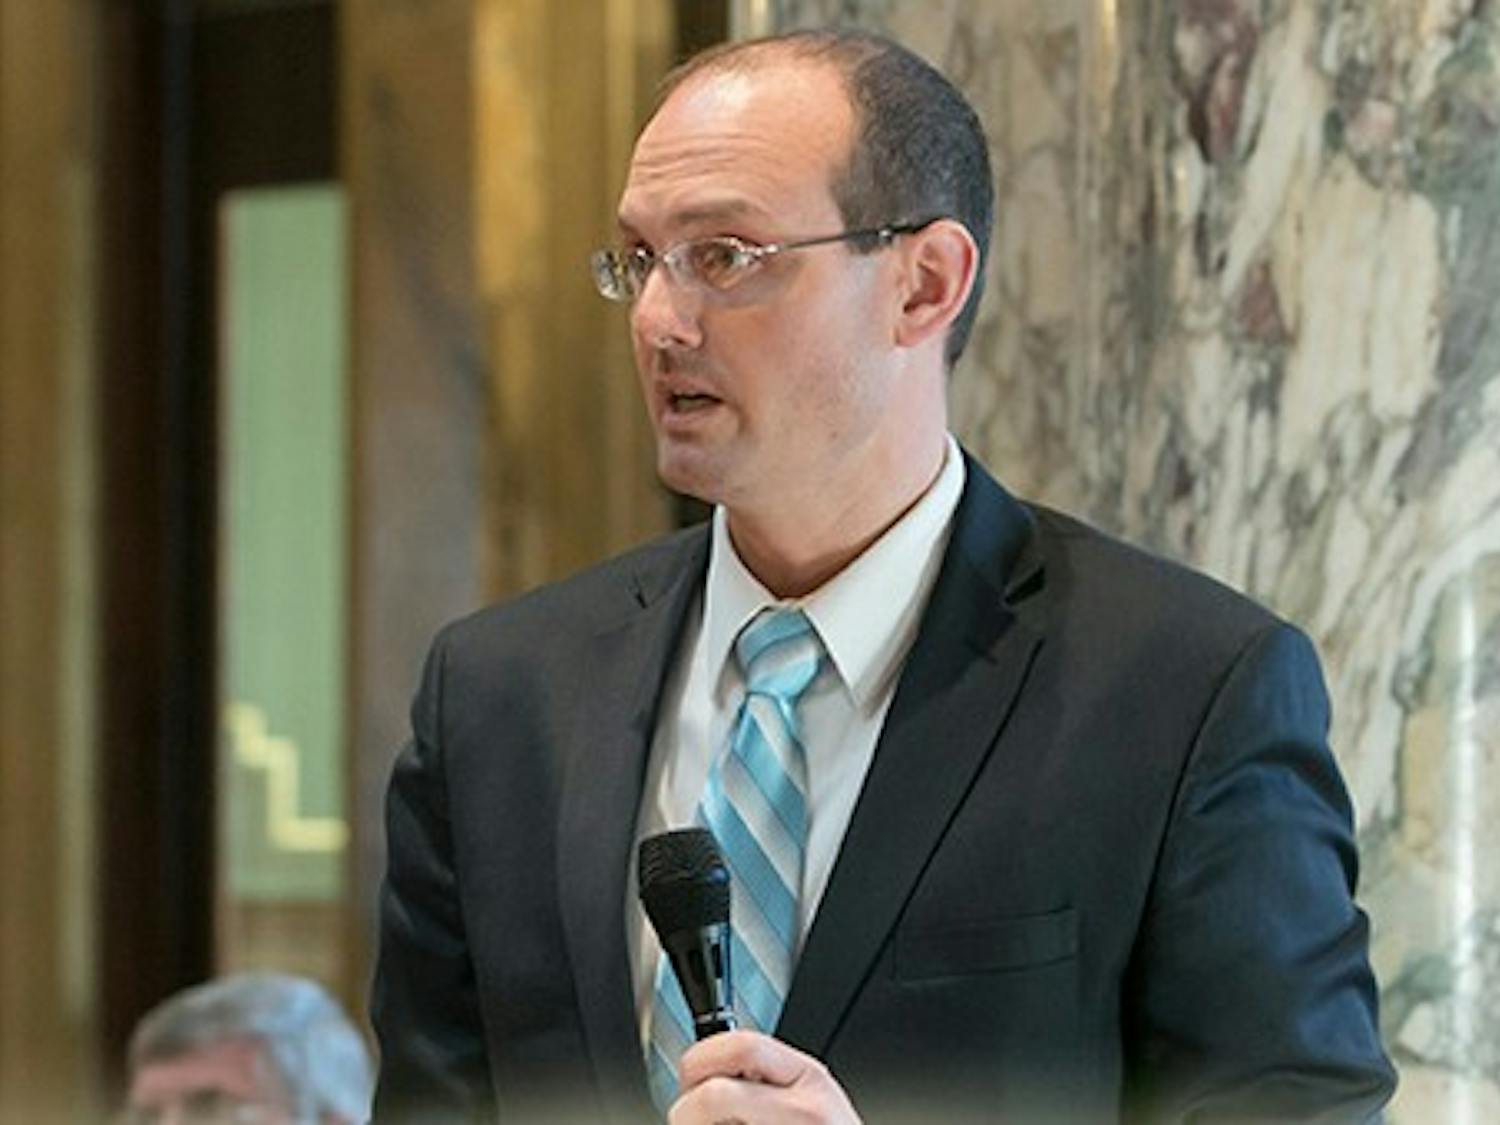 A bill authored by state Rep. Jesse Kremer, R-Kewaskum, to issue higher penalties to students who disrupt campus speakers passed an Assembly higher education committee Tuesday.